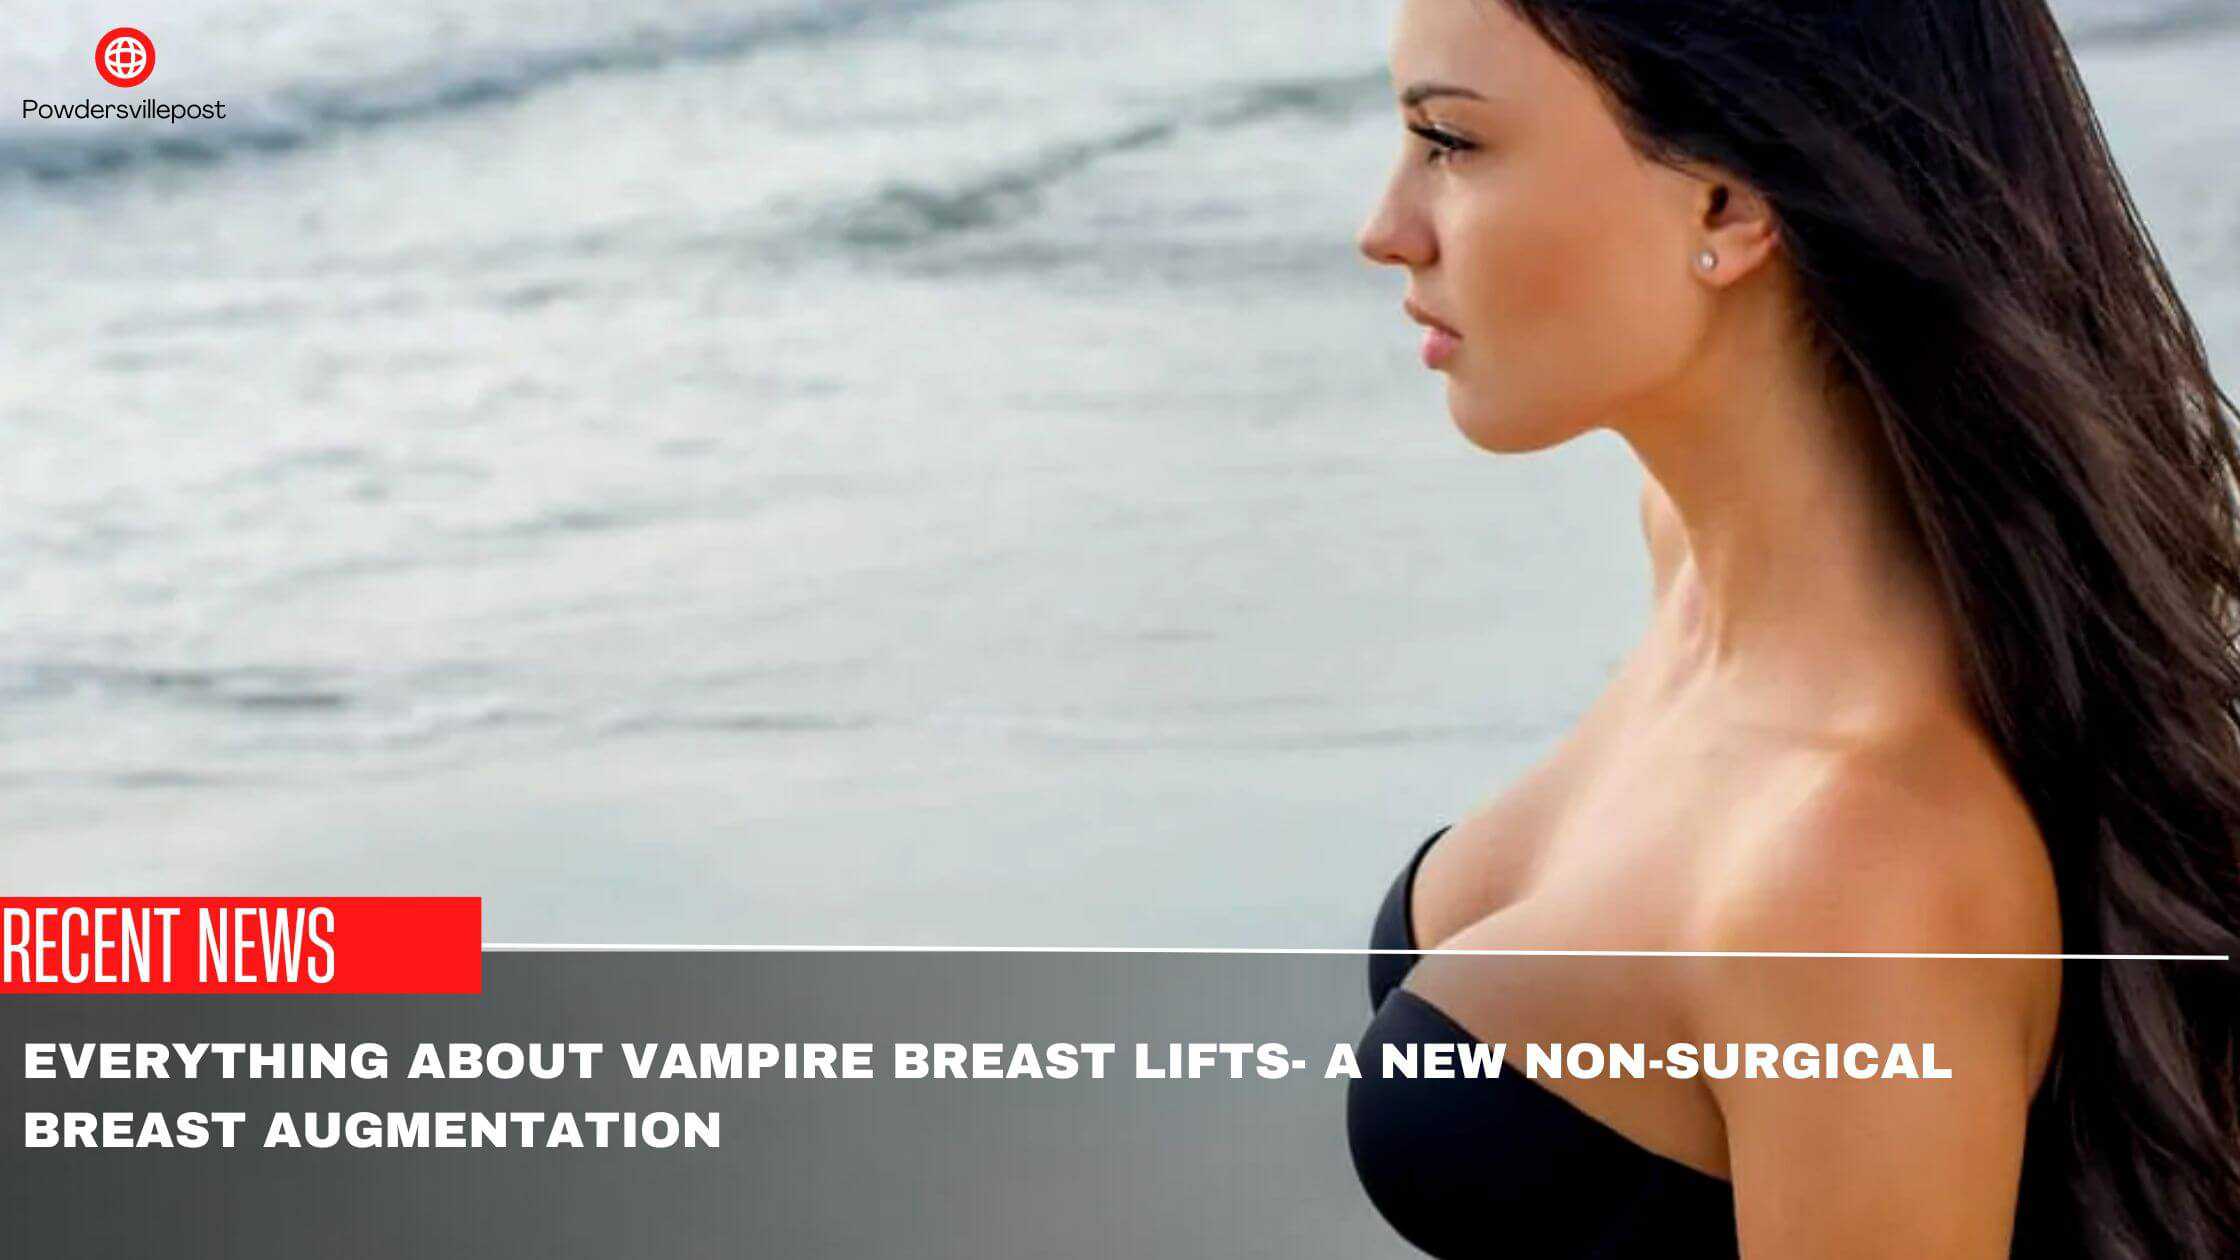 Everything About Vampire Breast Lifts- A New Non-surgical Breast Augmentation